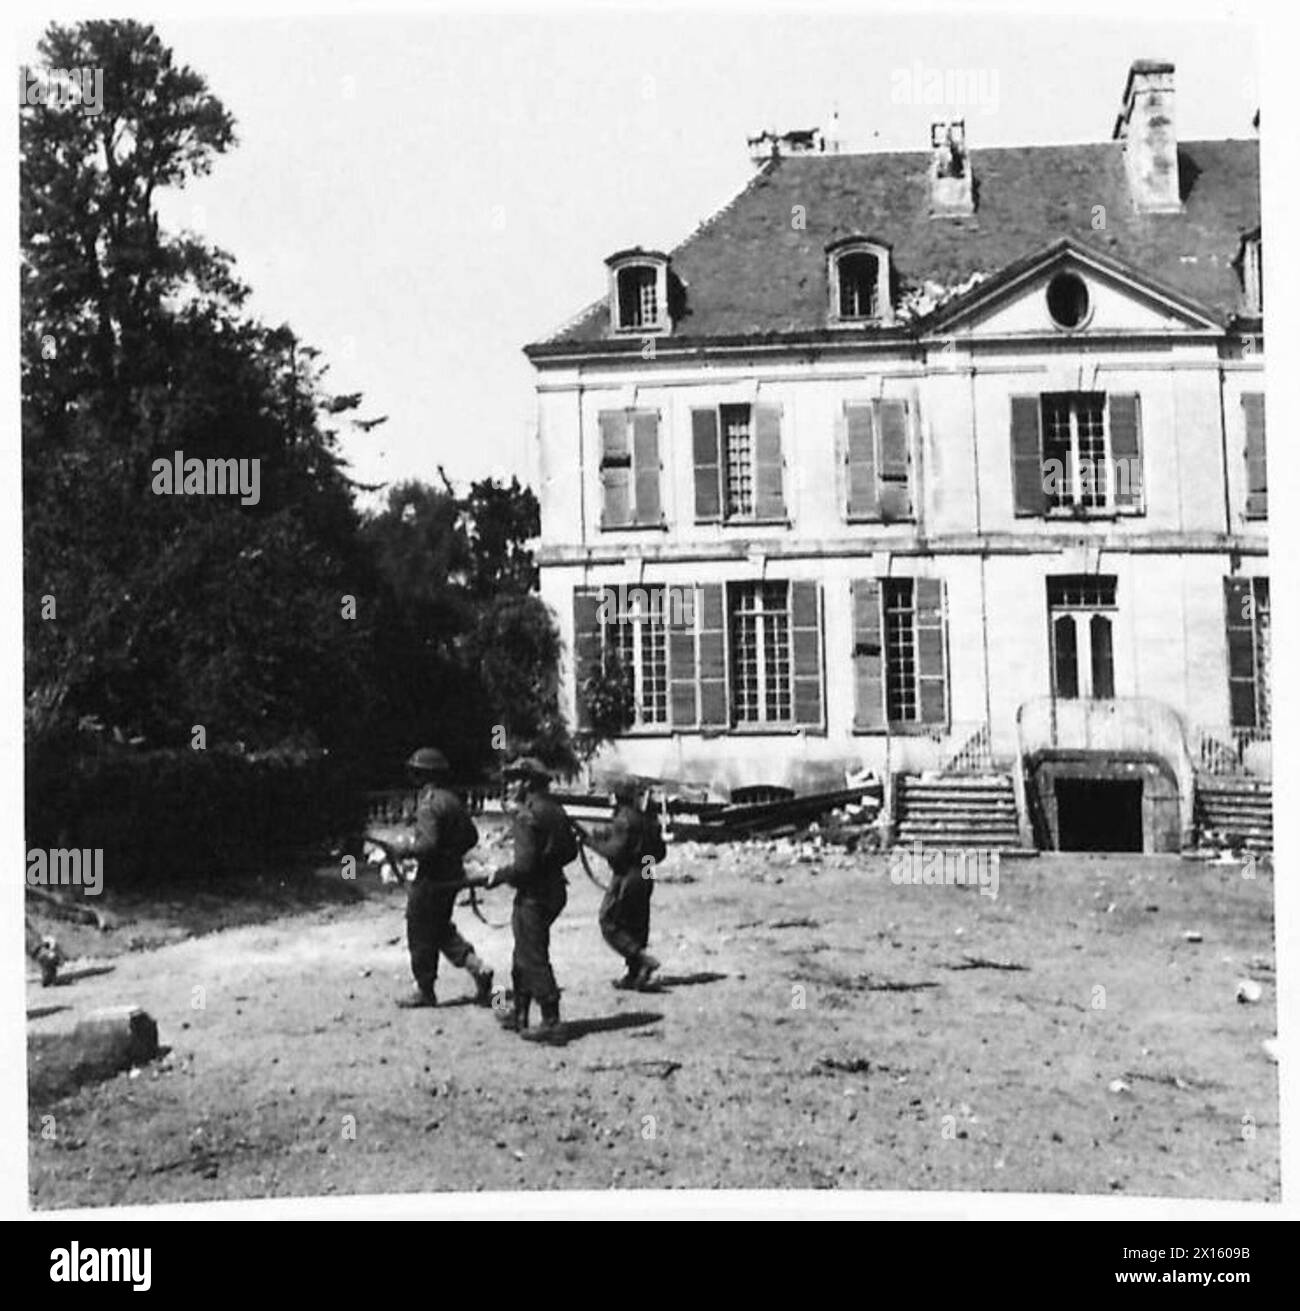 THE ADVANCE TOWARDS VILLERS BOCAGE - Infantrymen searching the grounds of a large chateau near Villy Bocage. The Germans had been using the building as a hospital and our troops were looking for possible snipers and prisoners.Identified as Chateau du Haut Fecq, in Monts-en-Bessin British Army, 21st Army Group Stock Photo